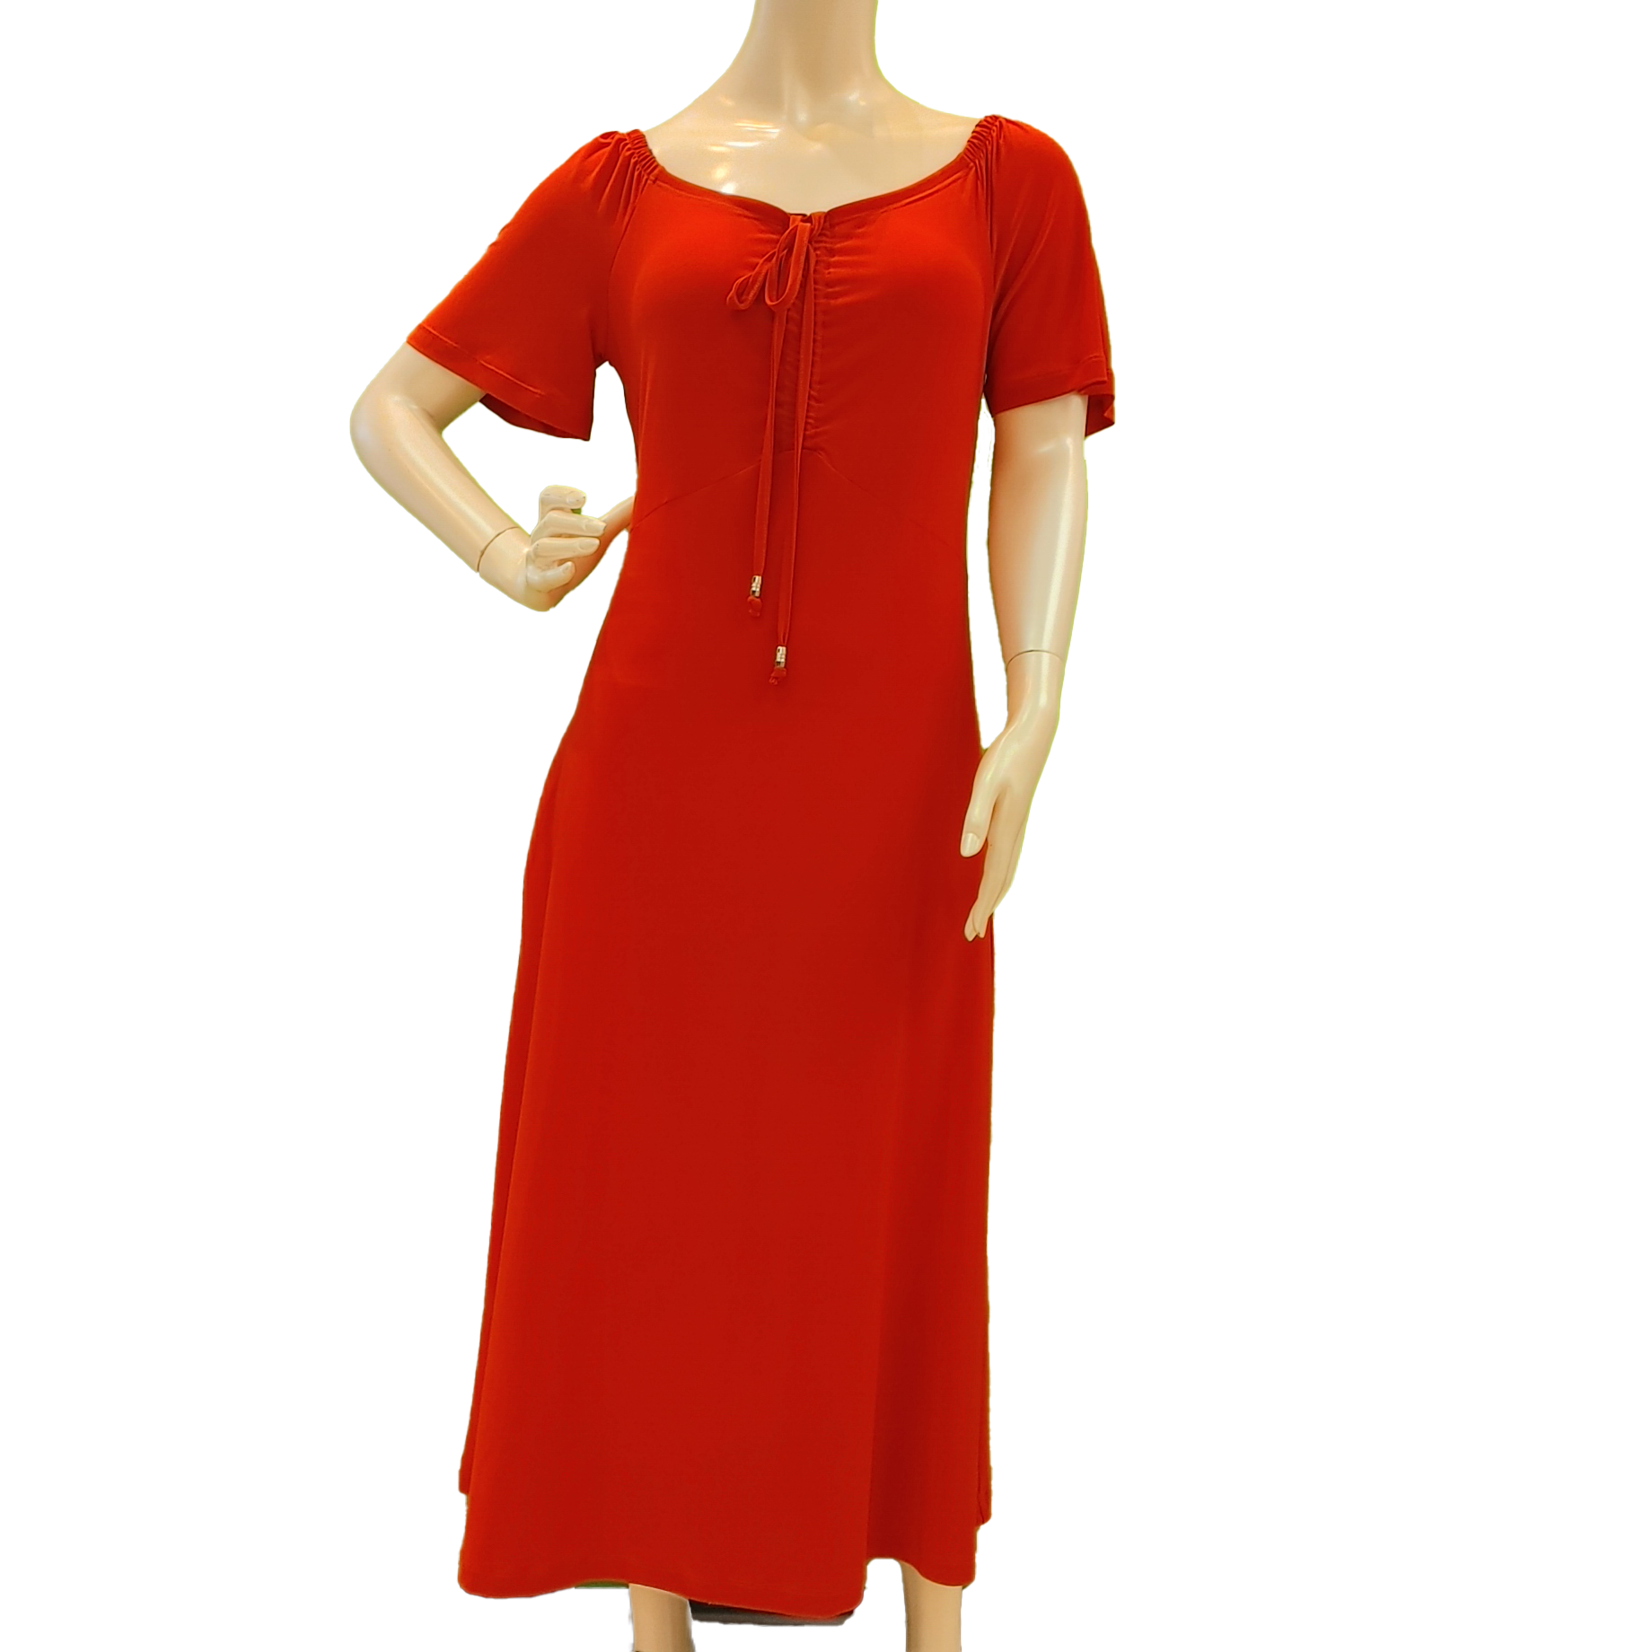 Artex short sleeve dress with rouching and tie front